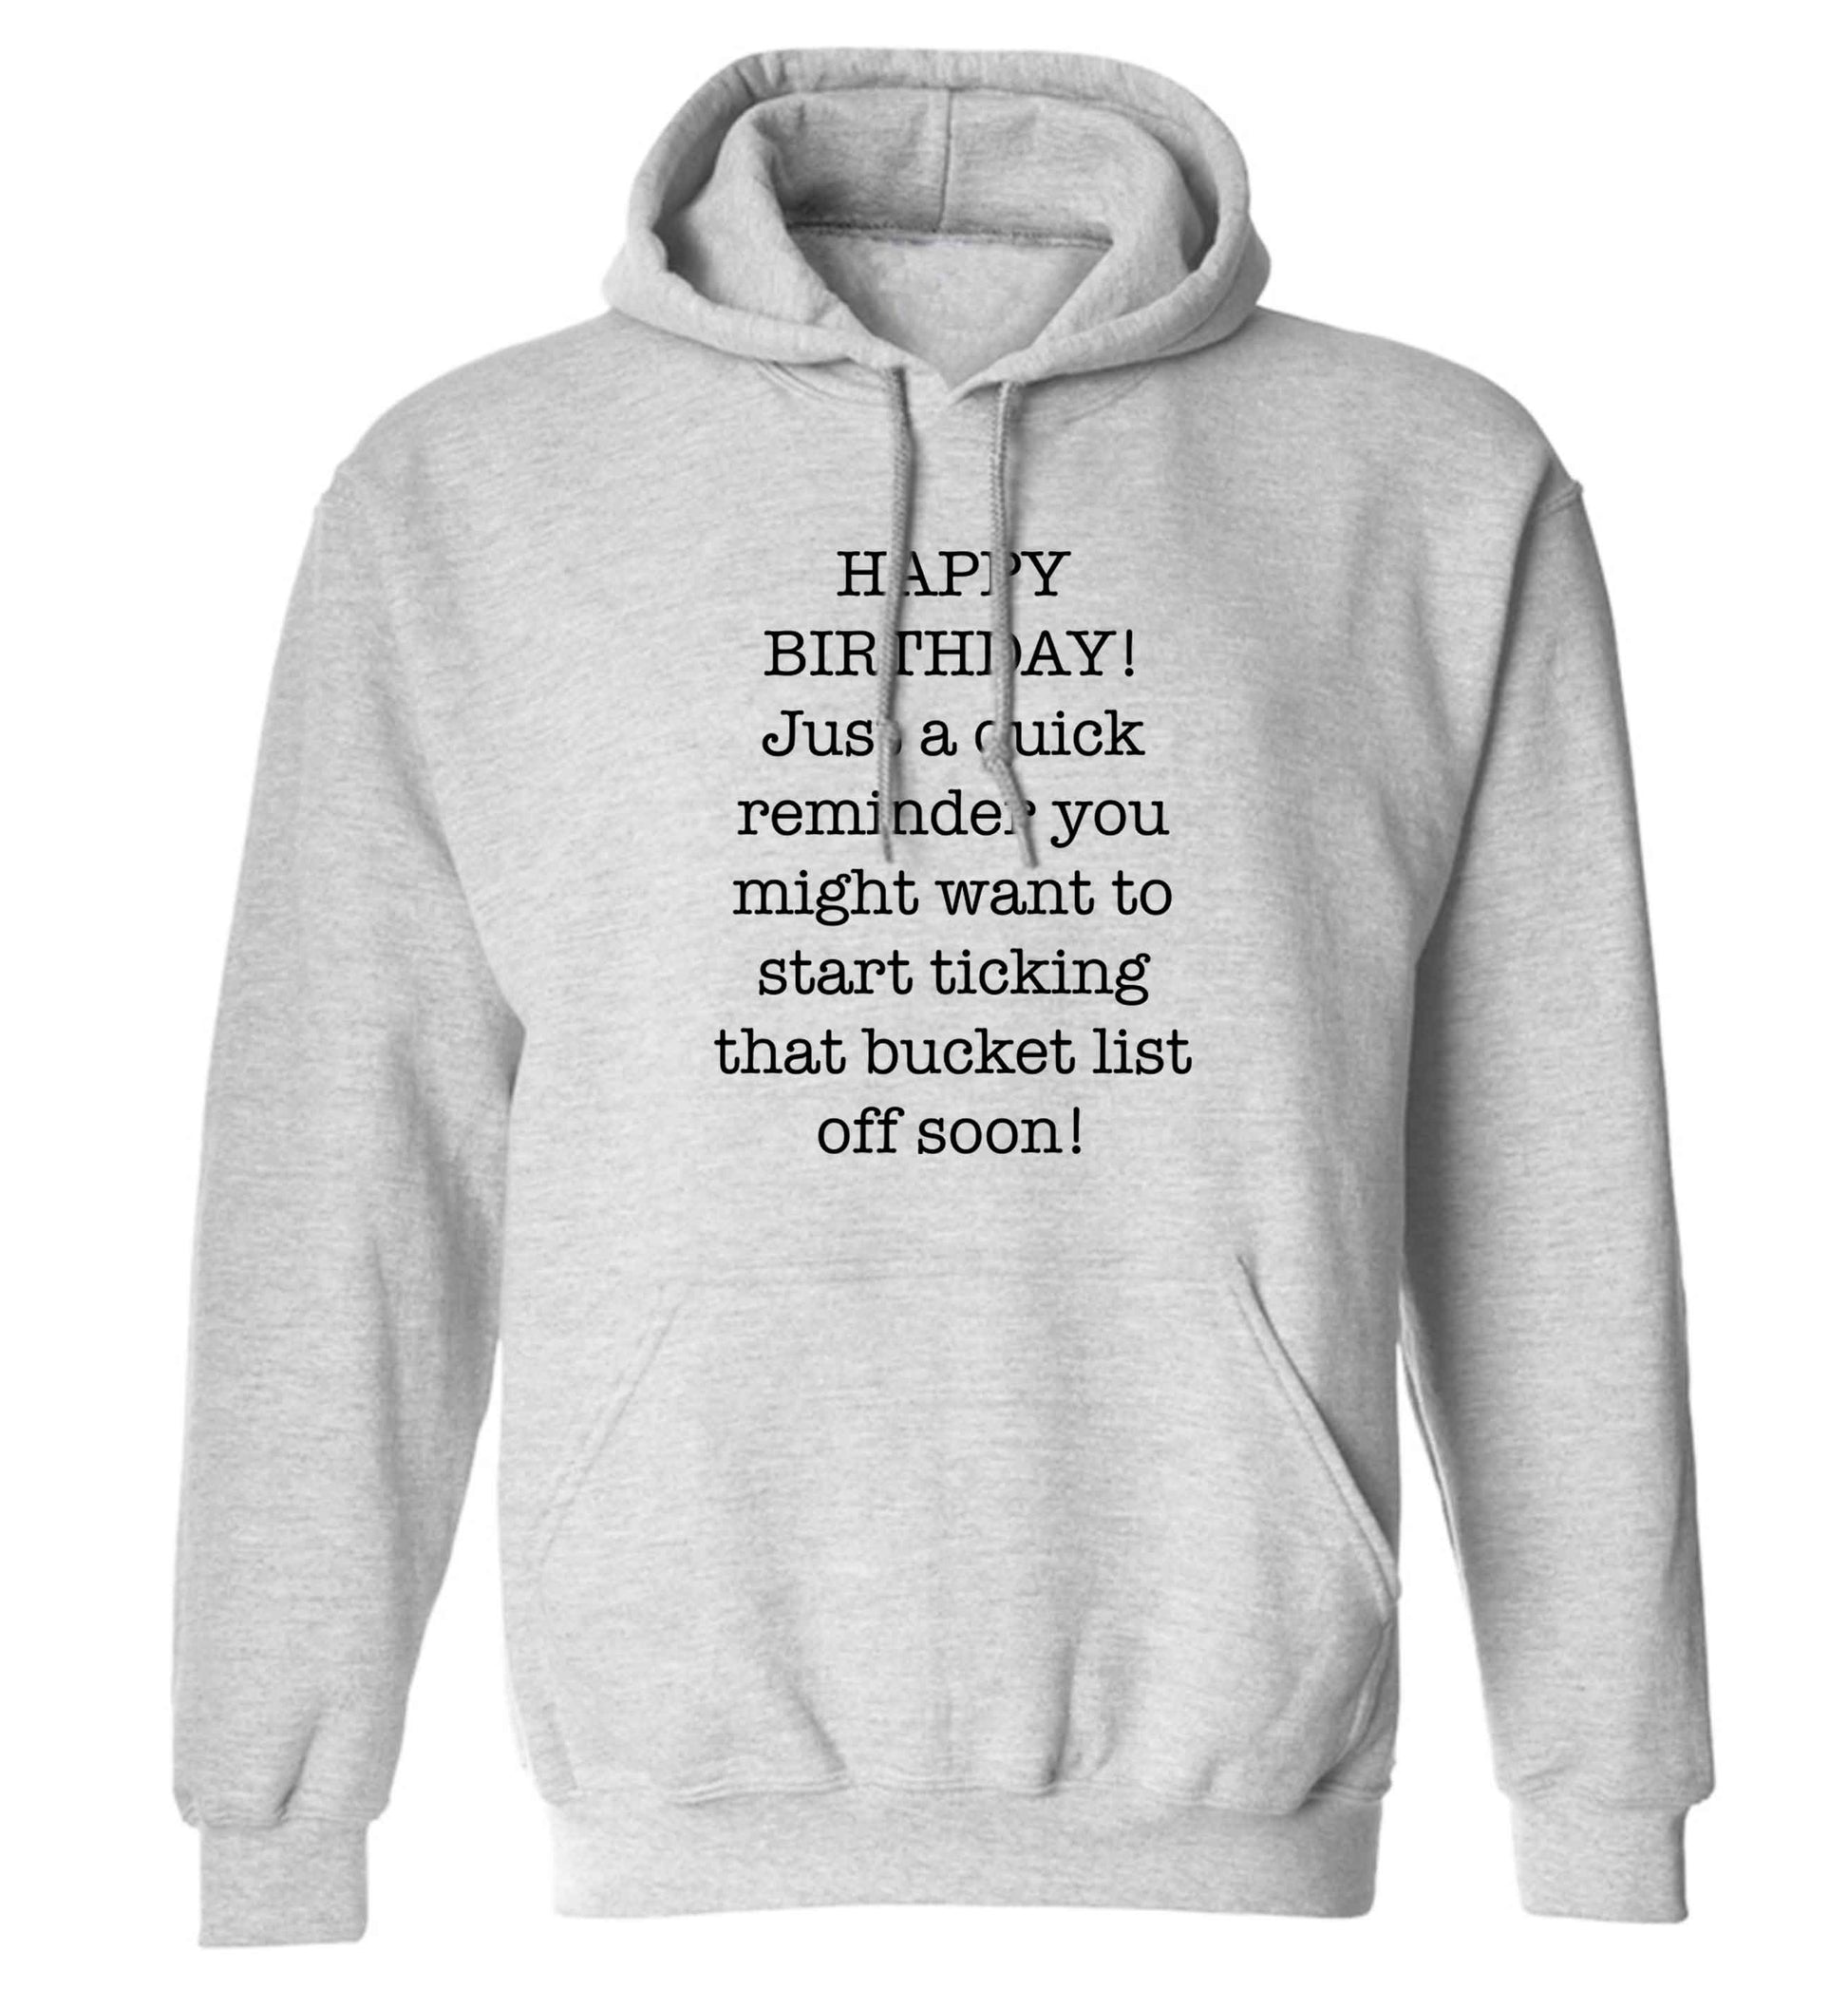 Happy birthday, just a quick reminder you might want to start ticking that bucket list off soon adults unisex grey hoodie 2XL